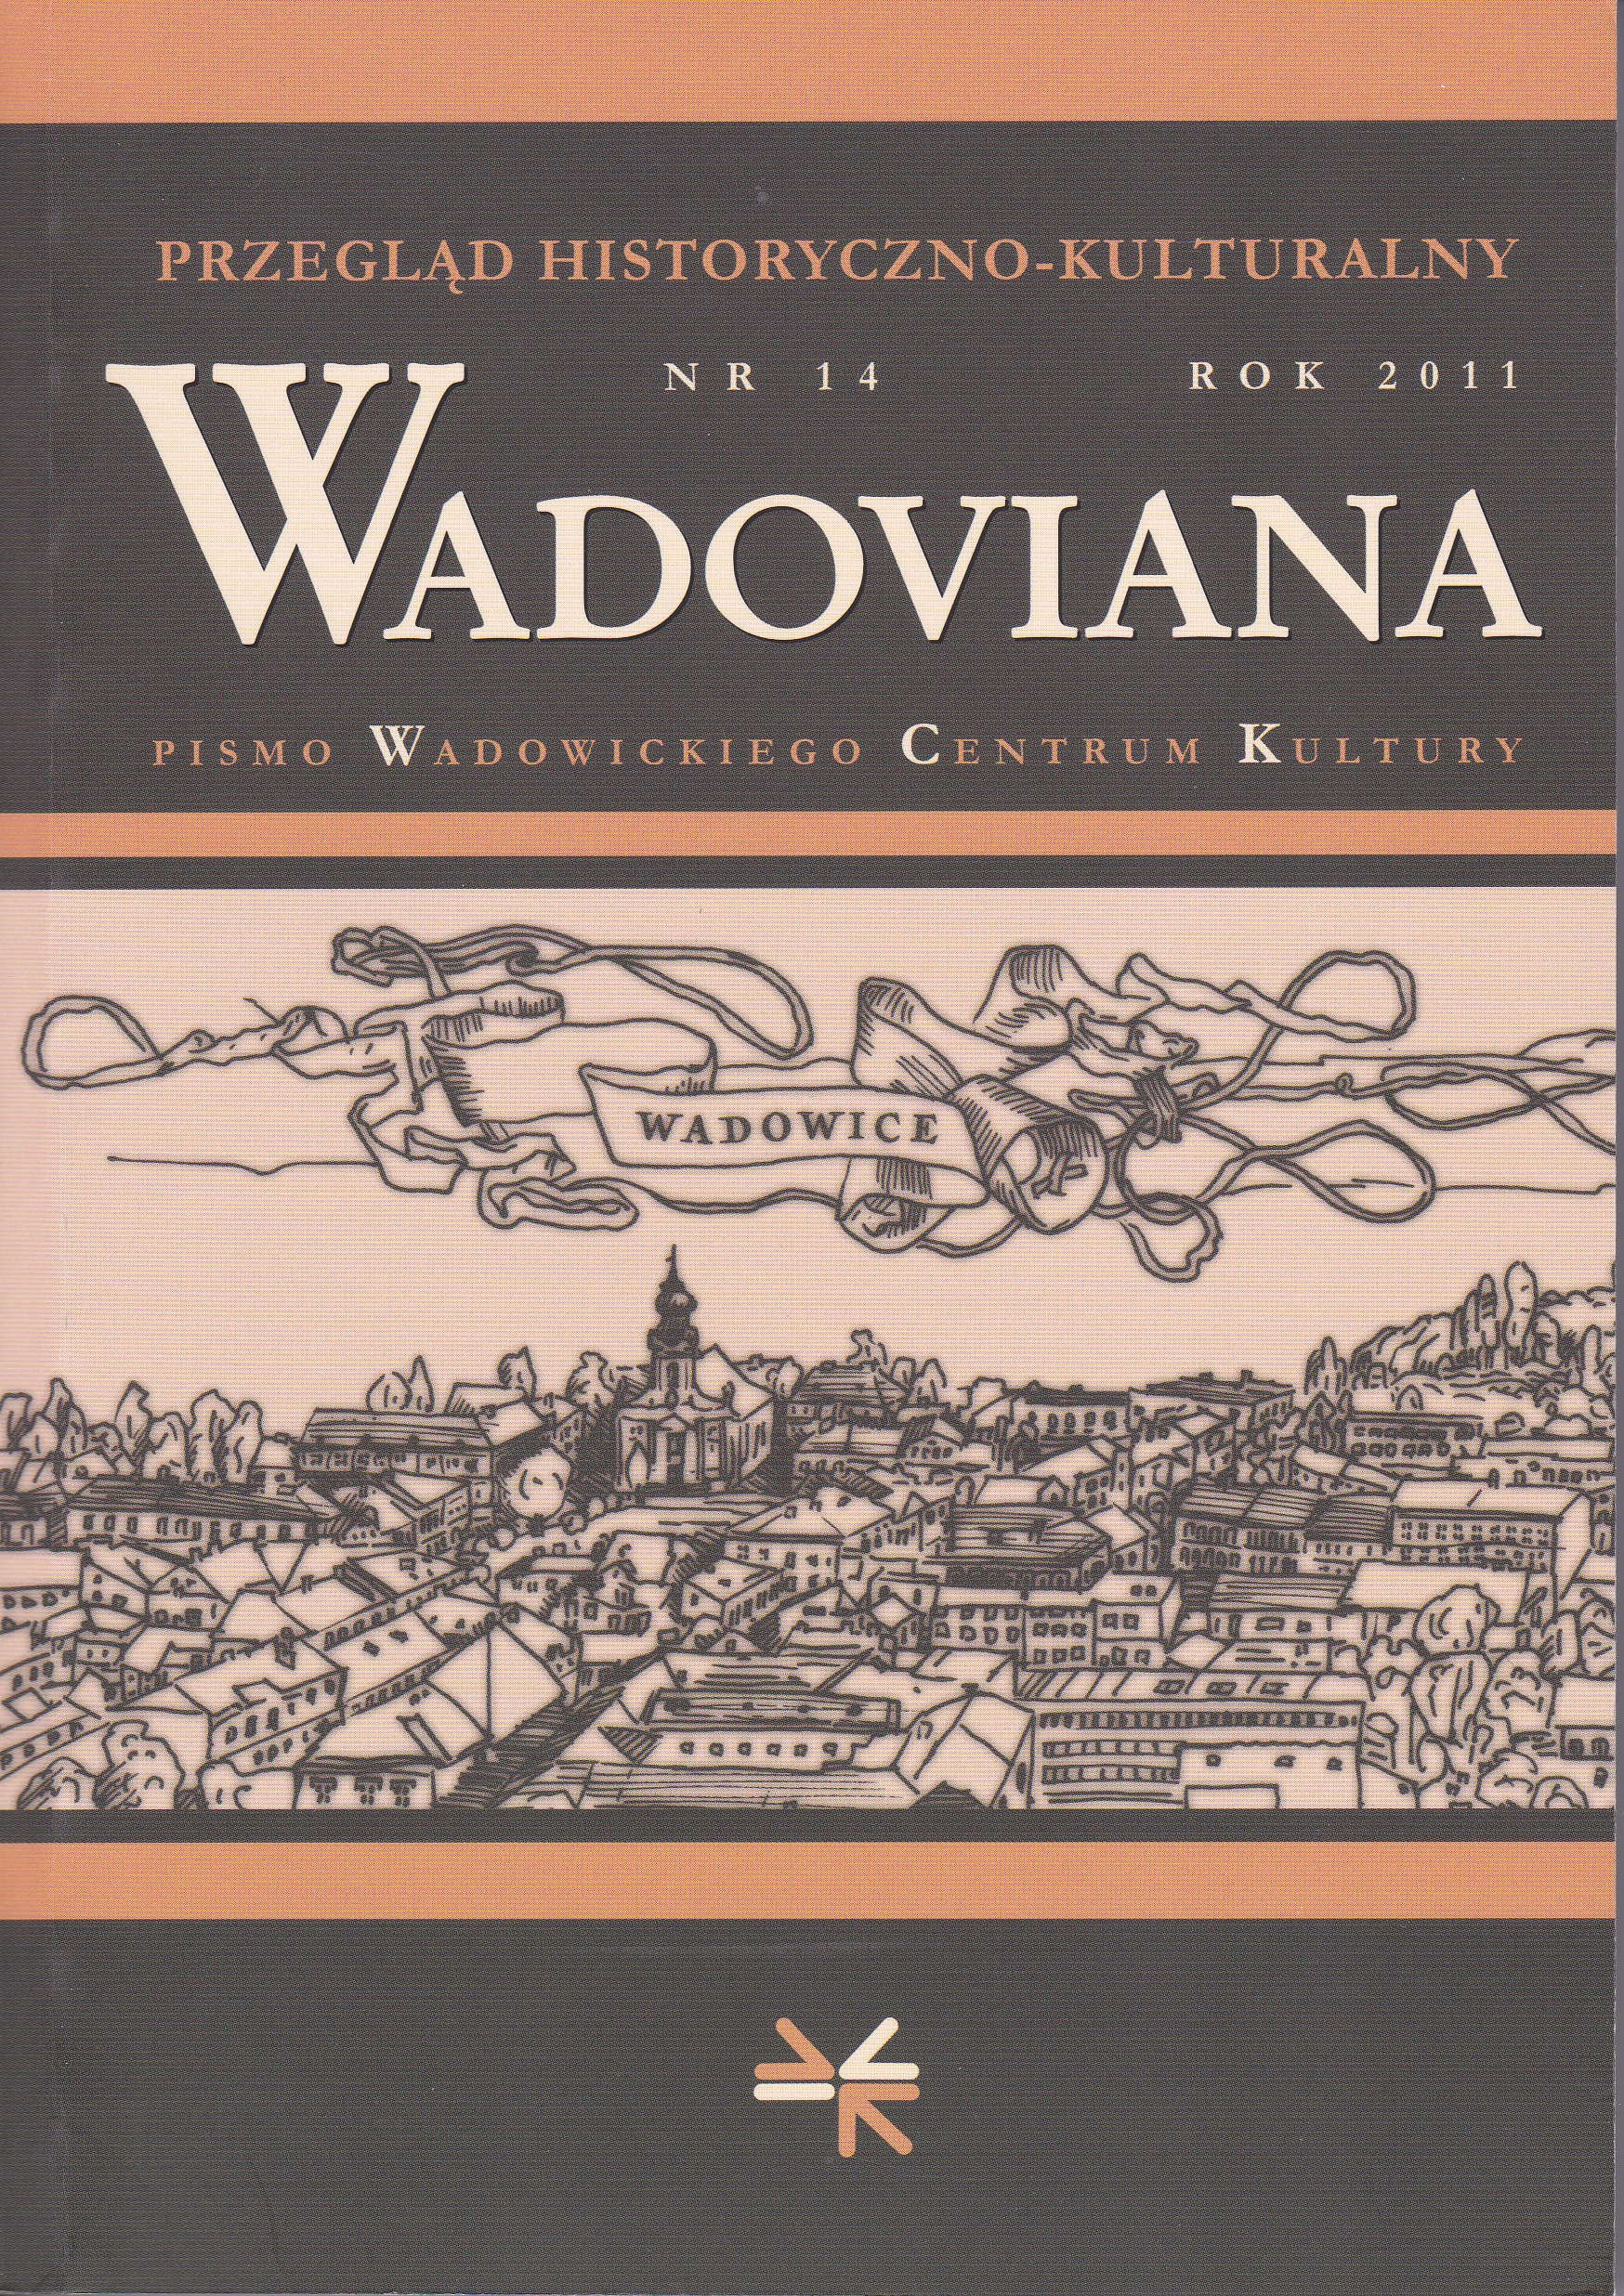 Marian Książkiewicz and his "Arkusz Wadowice" map Cover Image